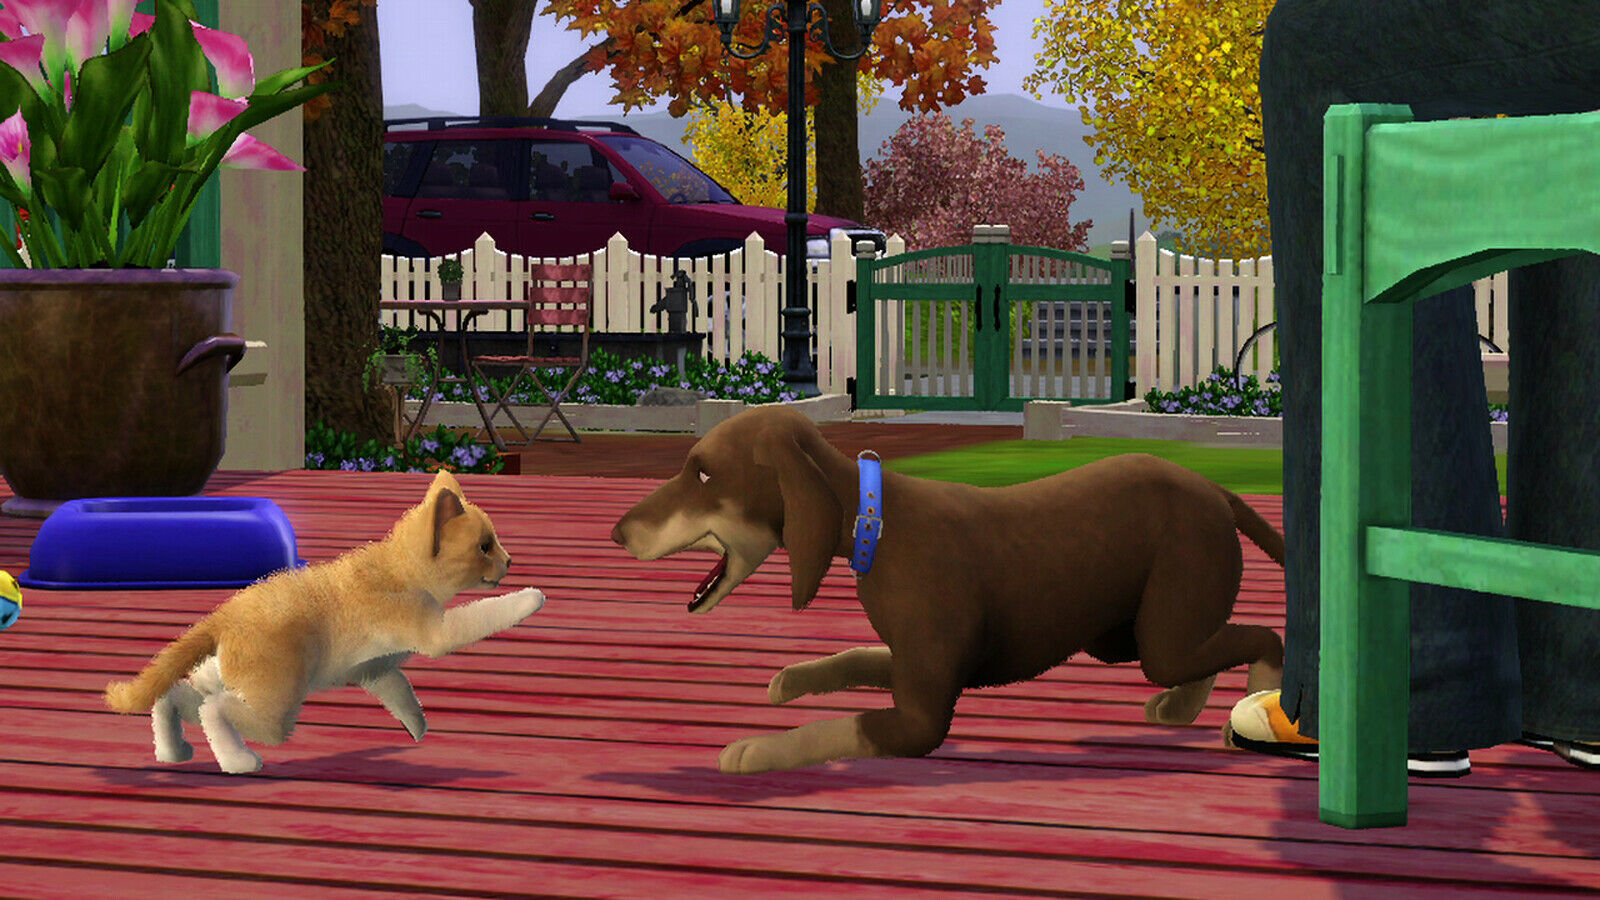 Pet 3 book. SIMS 3 Pets Xbox 360. The SIMS 3 питомцы. Игра the SIMS 3 питомцы. The SIMS 3 Pets питомцы.